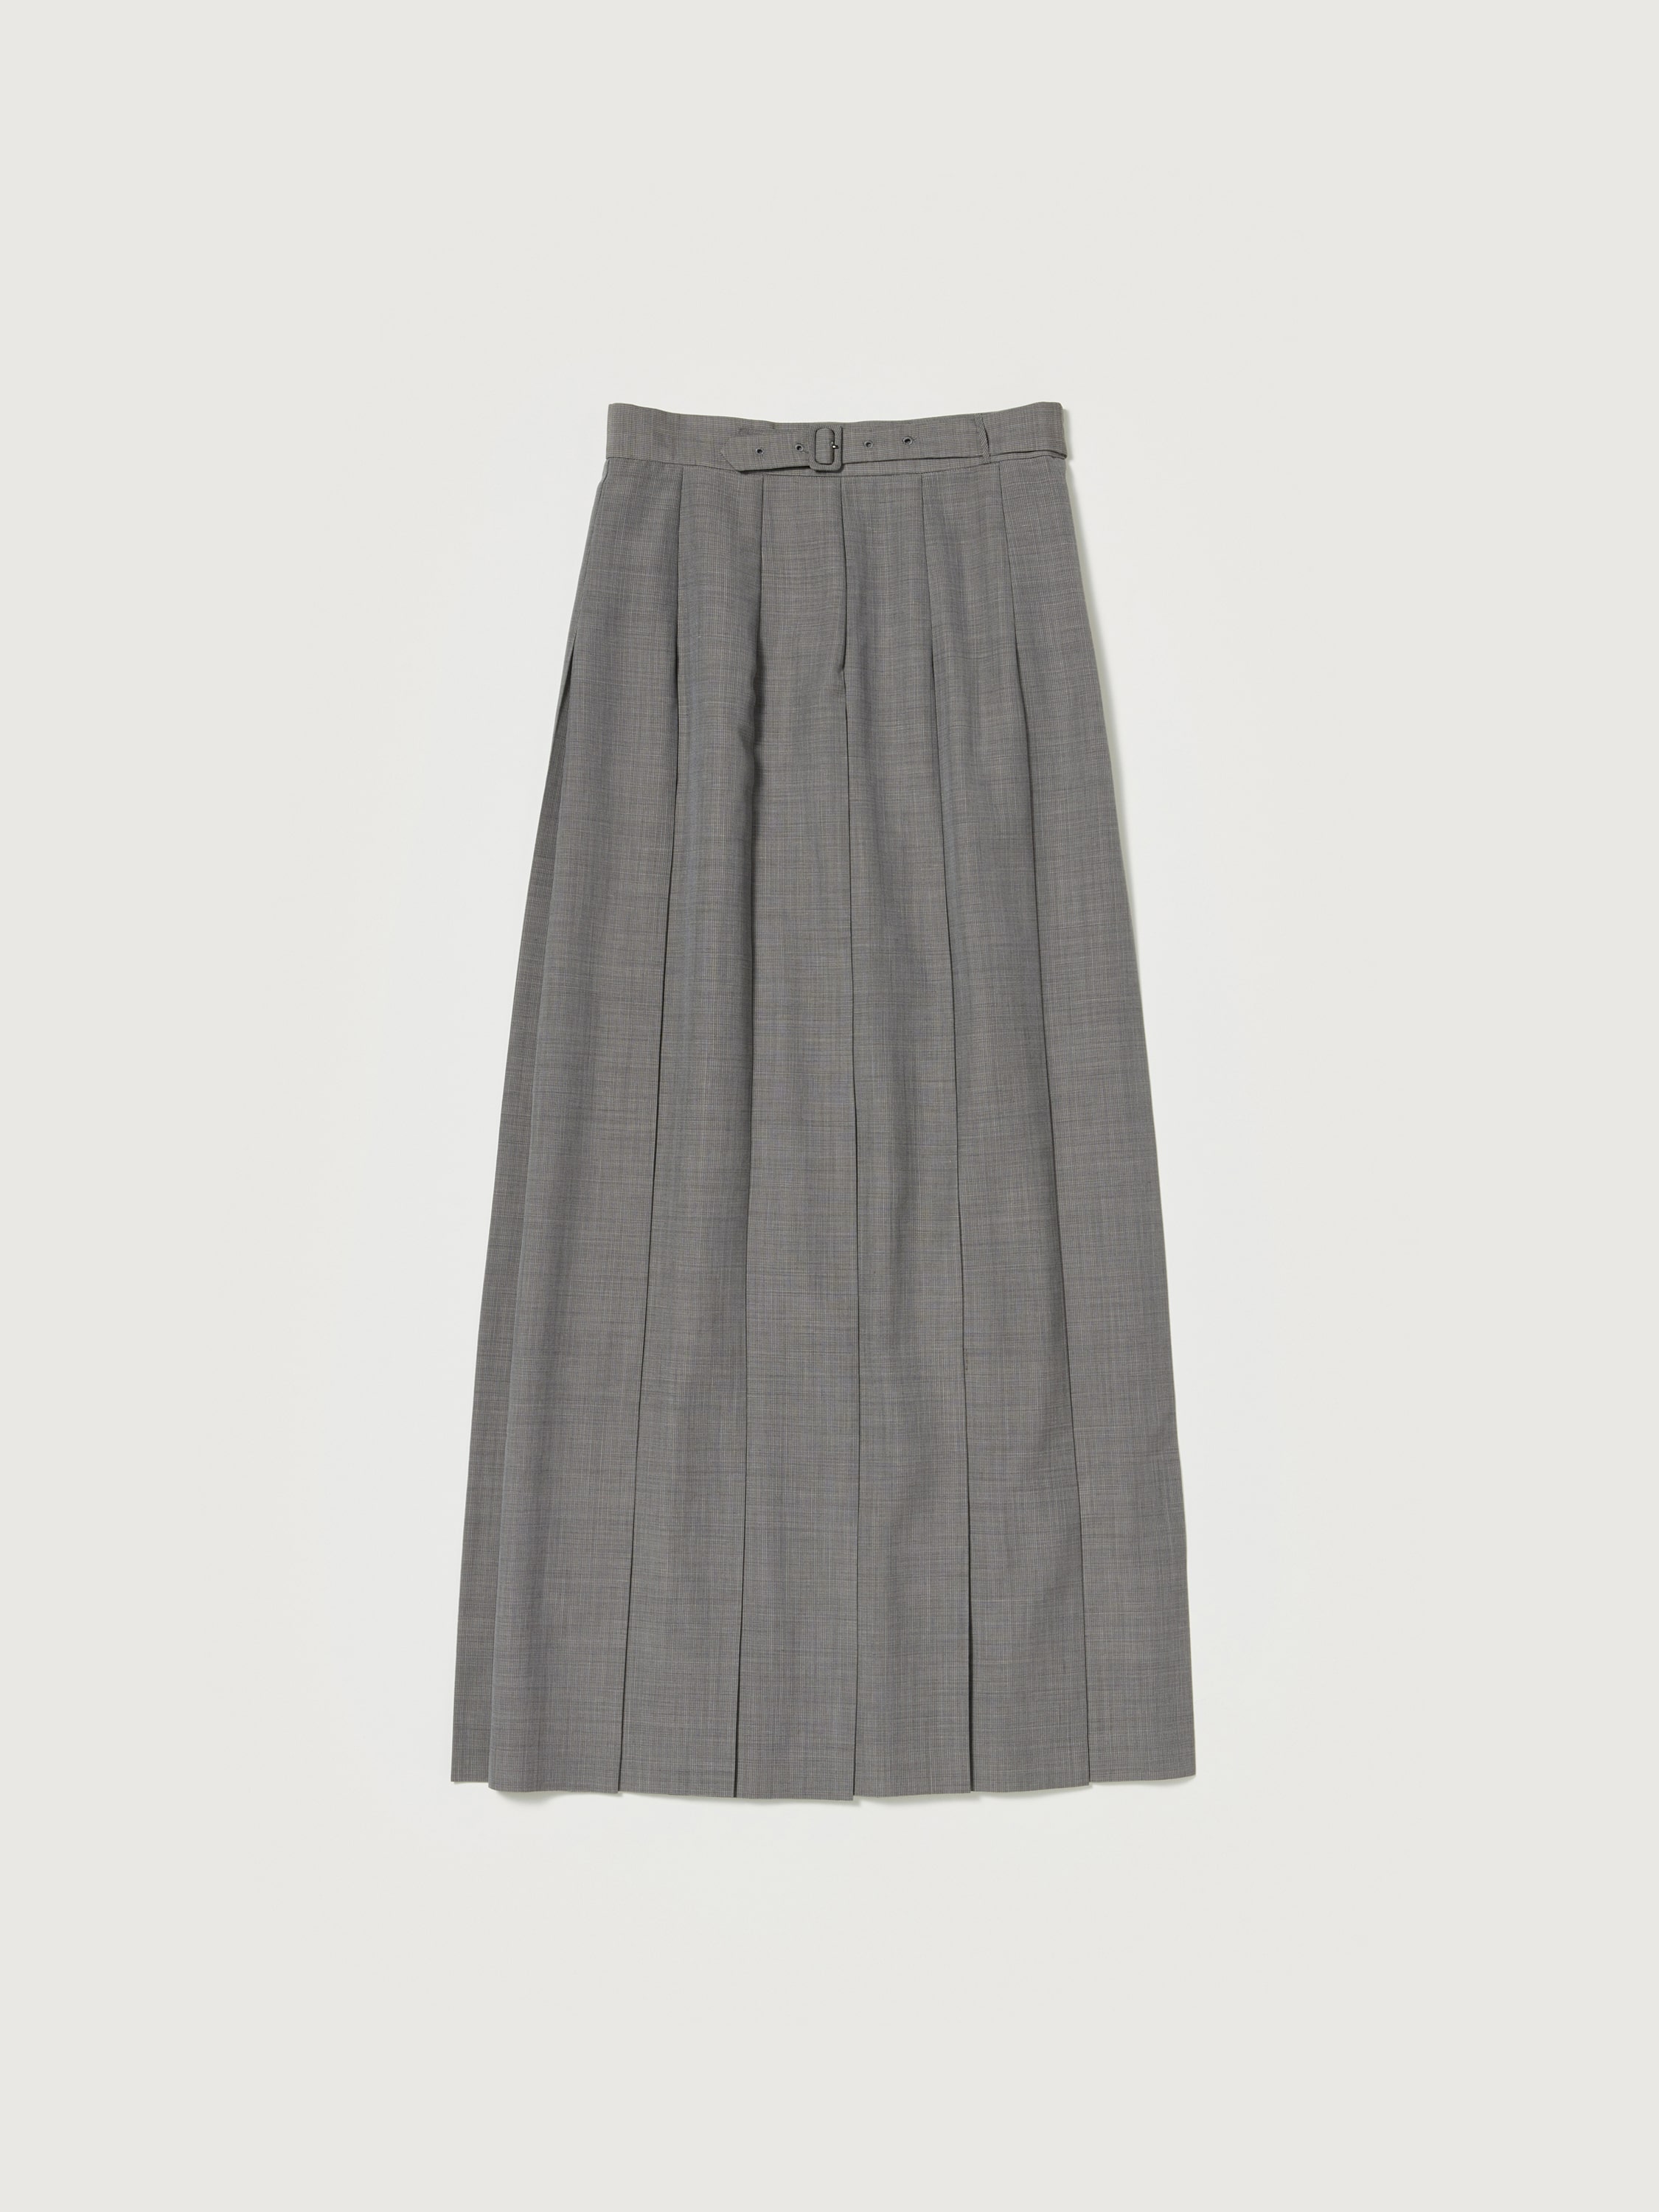 TROPICAL WOOL KID MOHAIR PLEATED SKIRT 詳細画像 GRAY CHECK 1